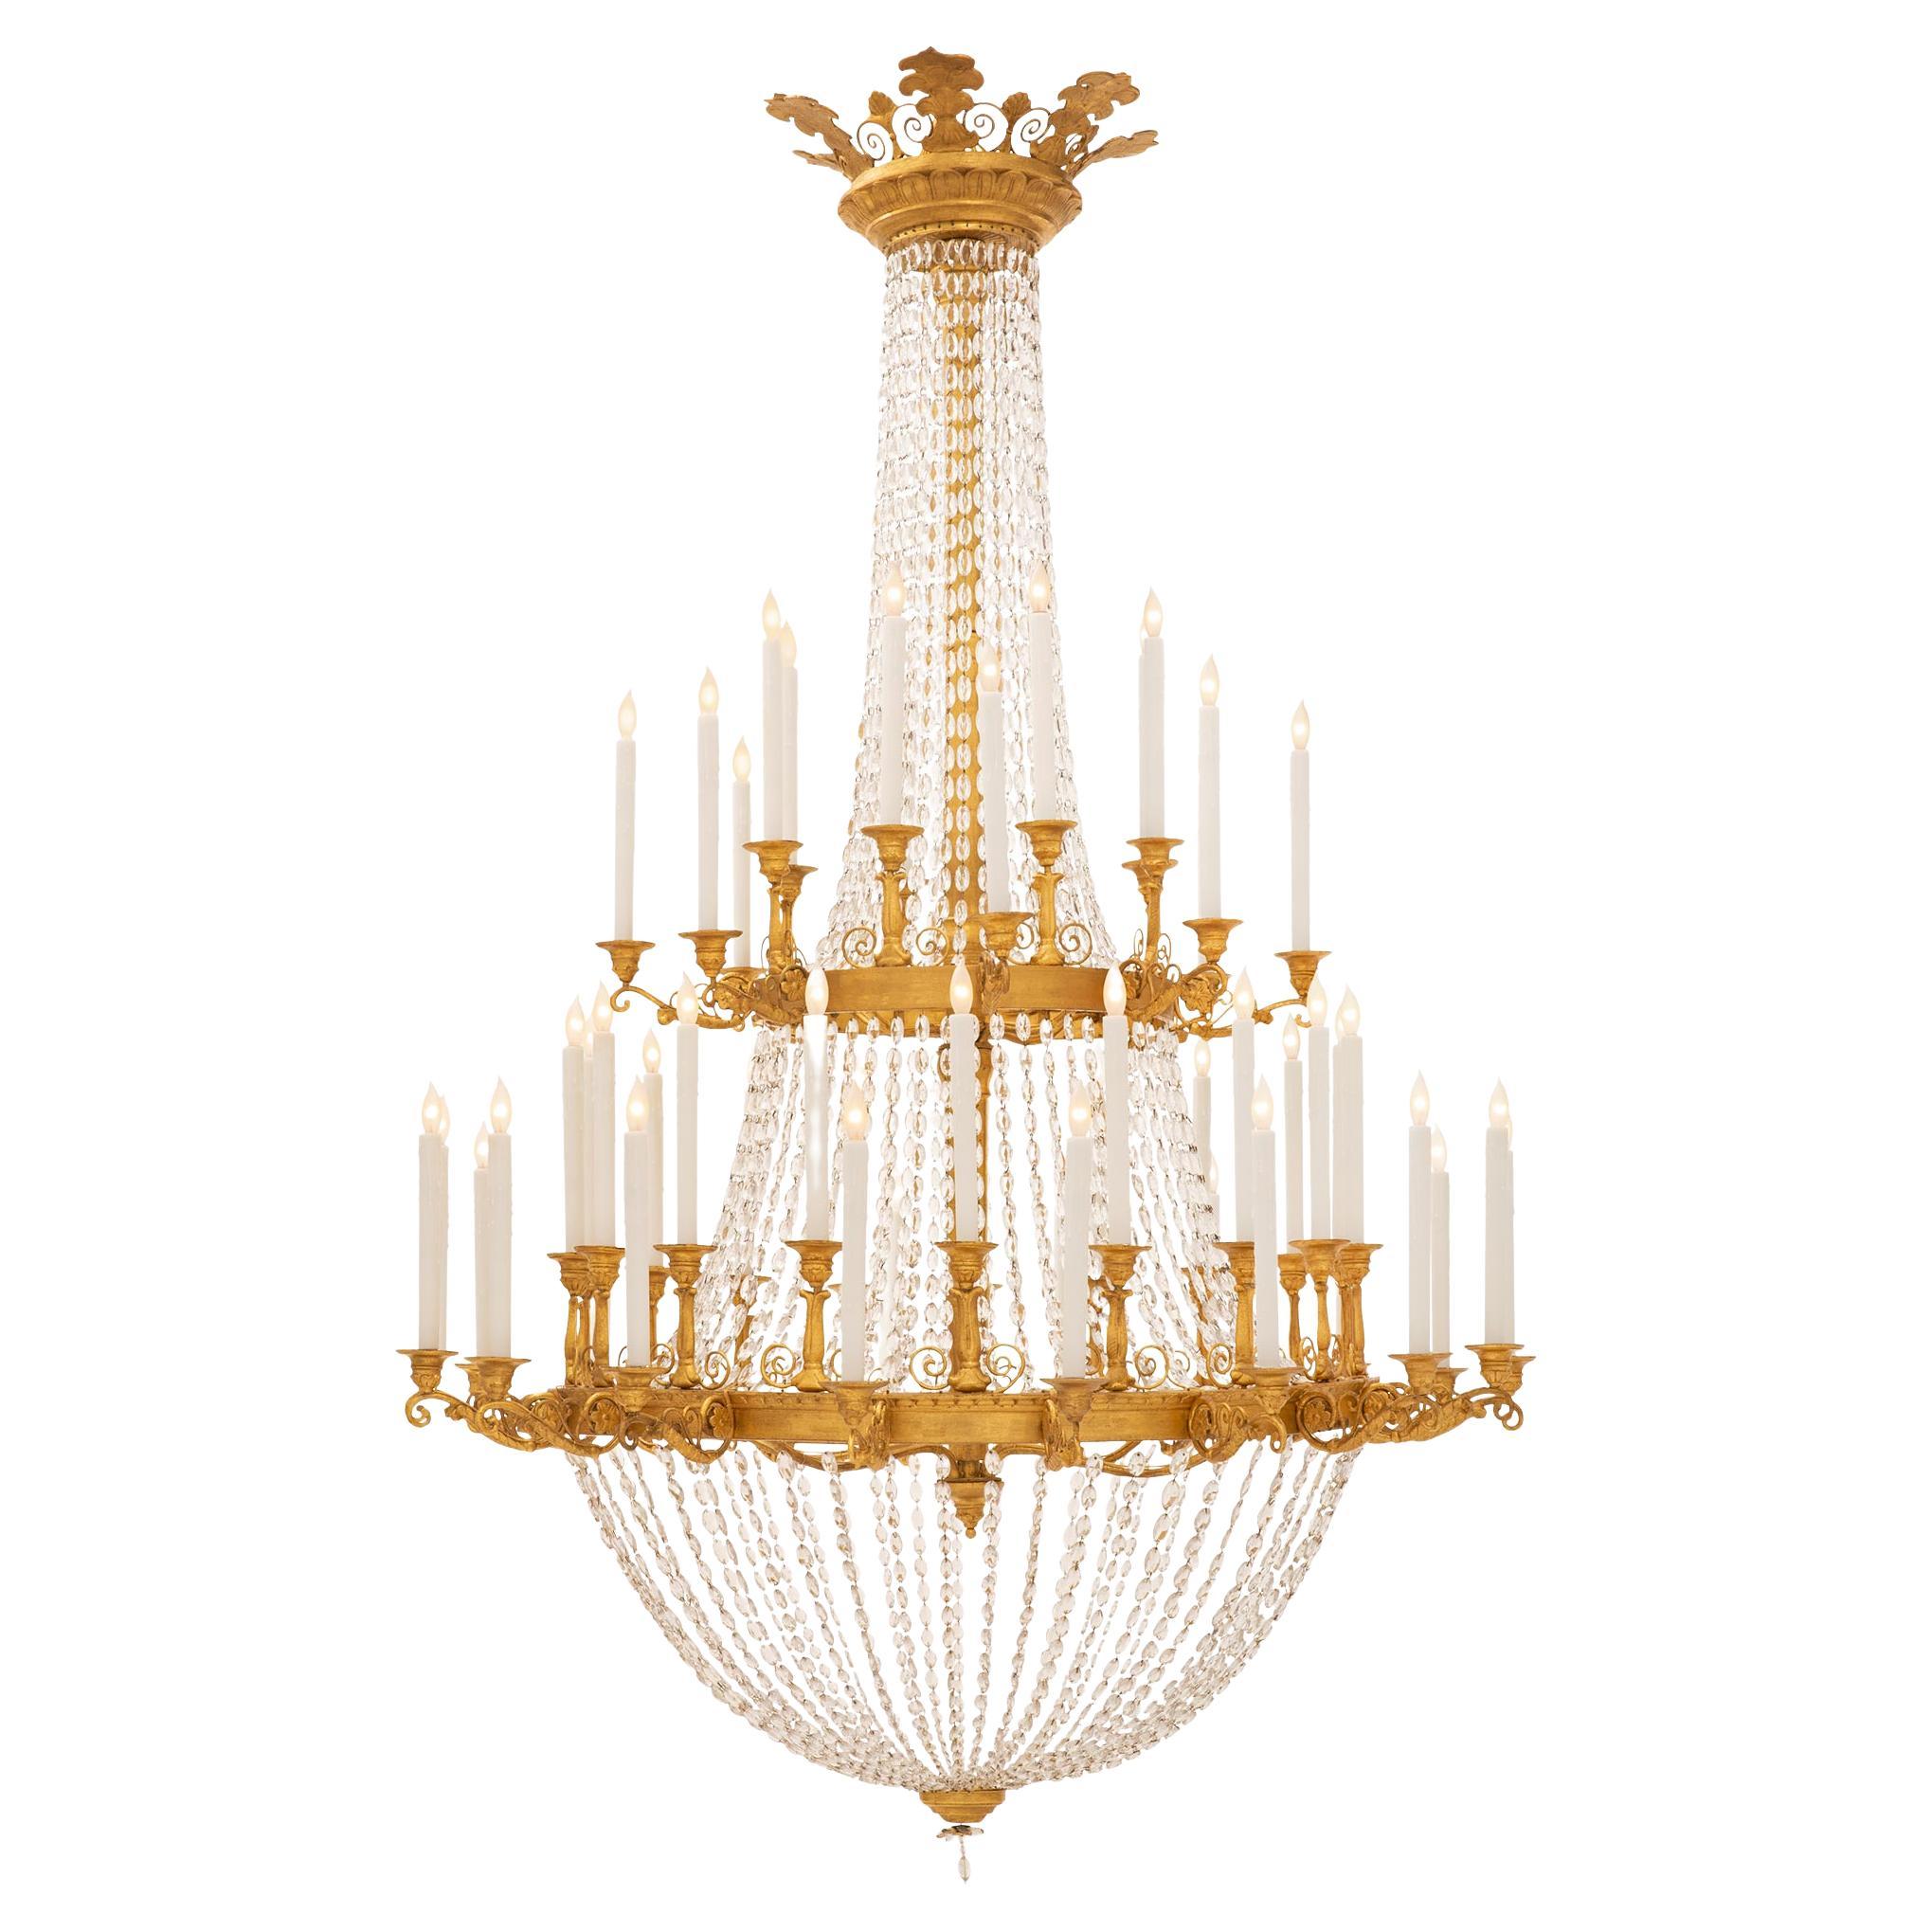 An Italian 18th century Neo-Classical st. giltwood and crystal chandelier